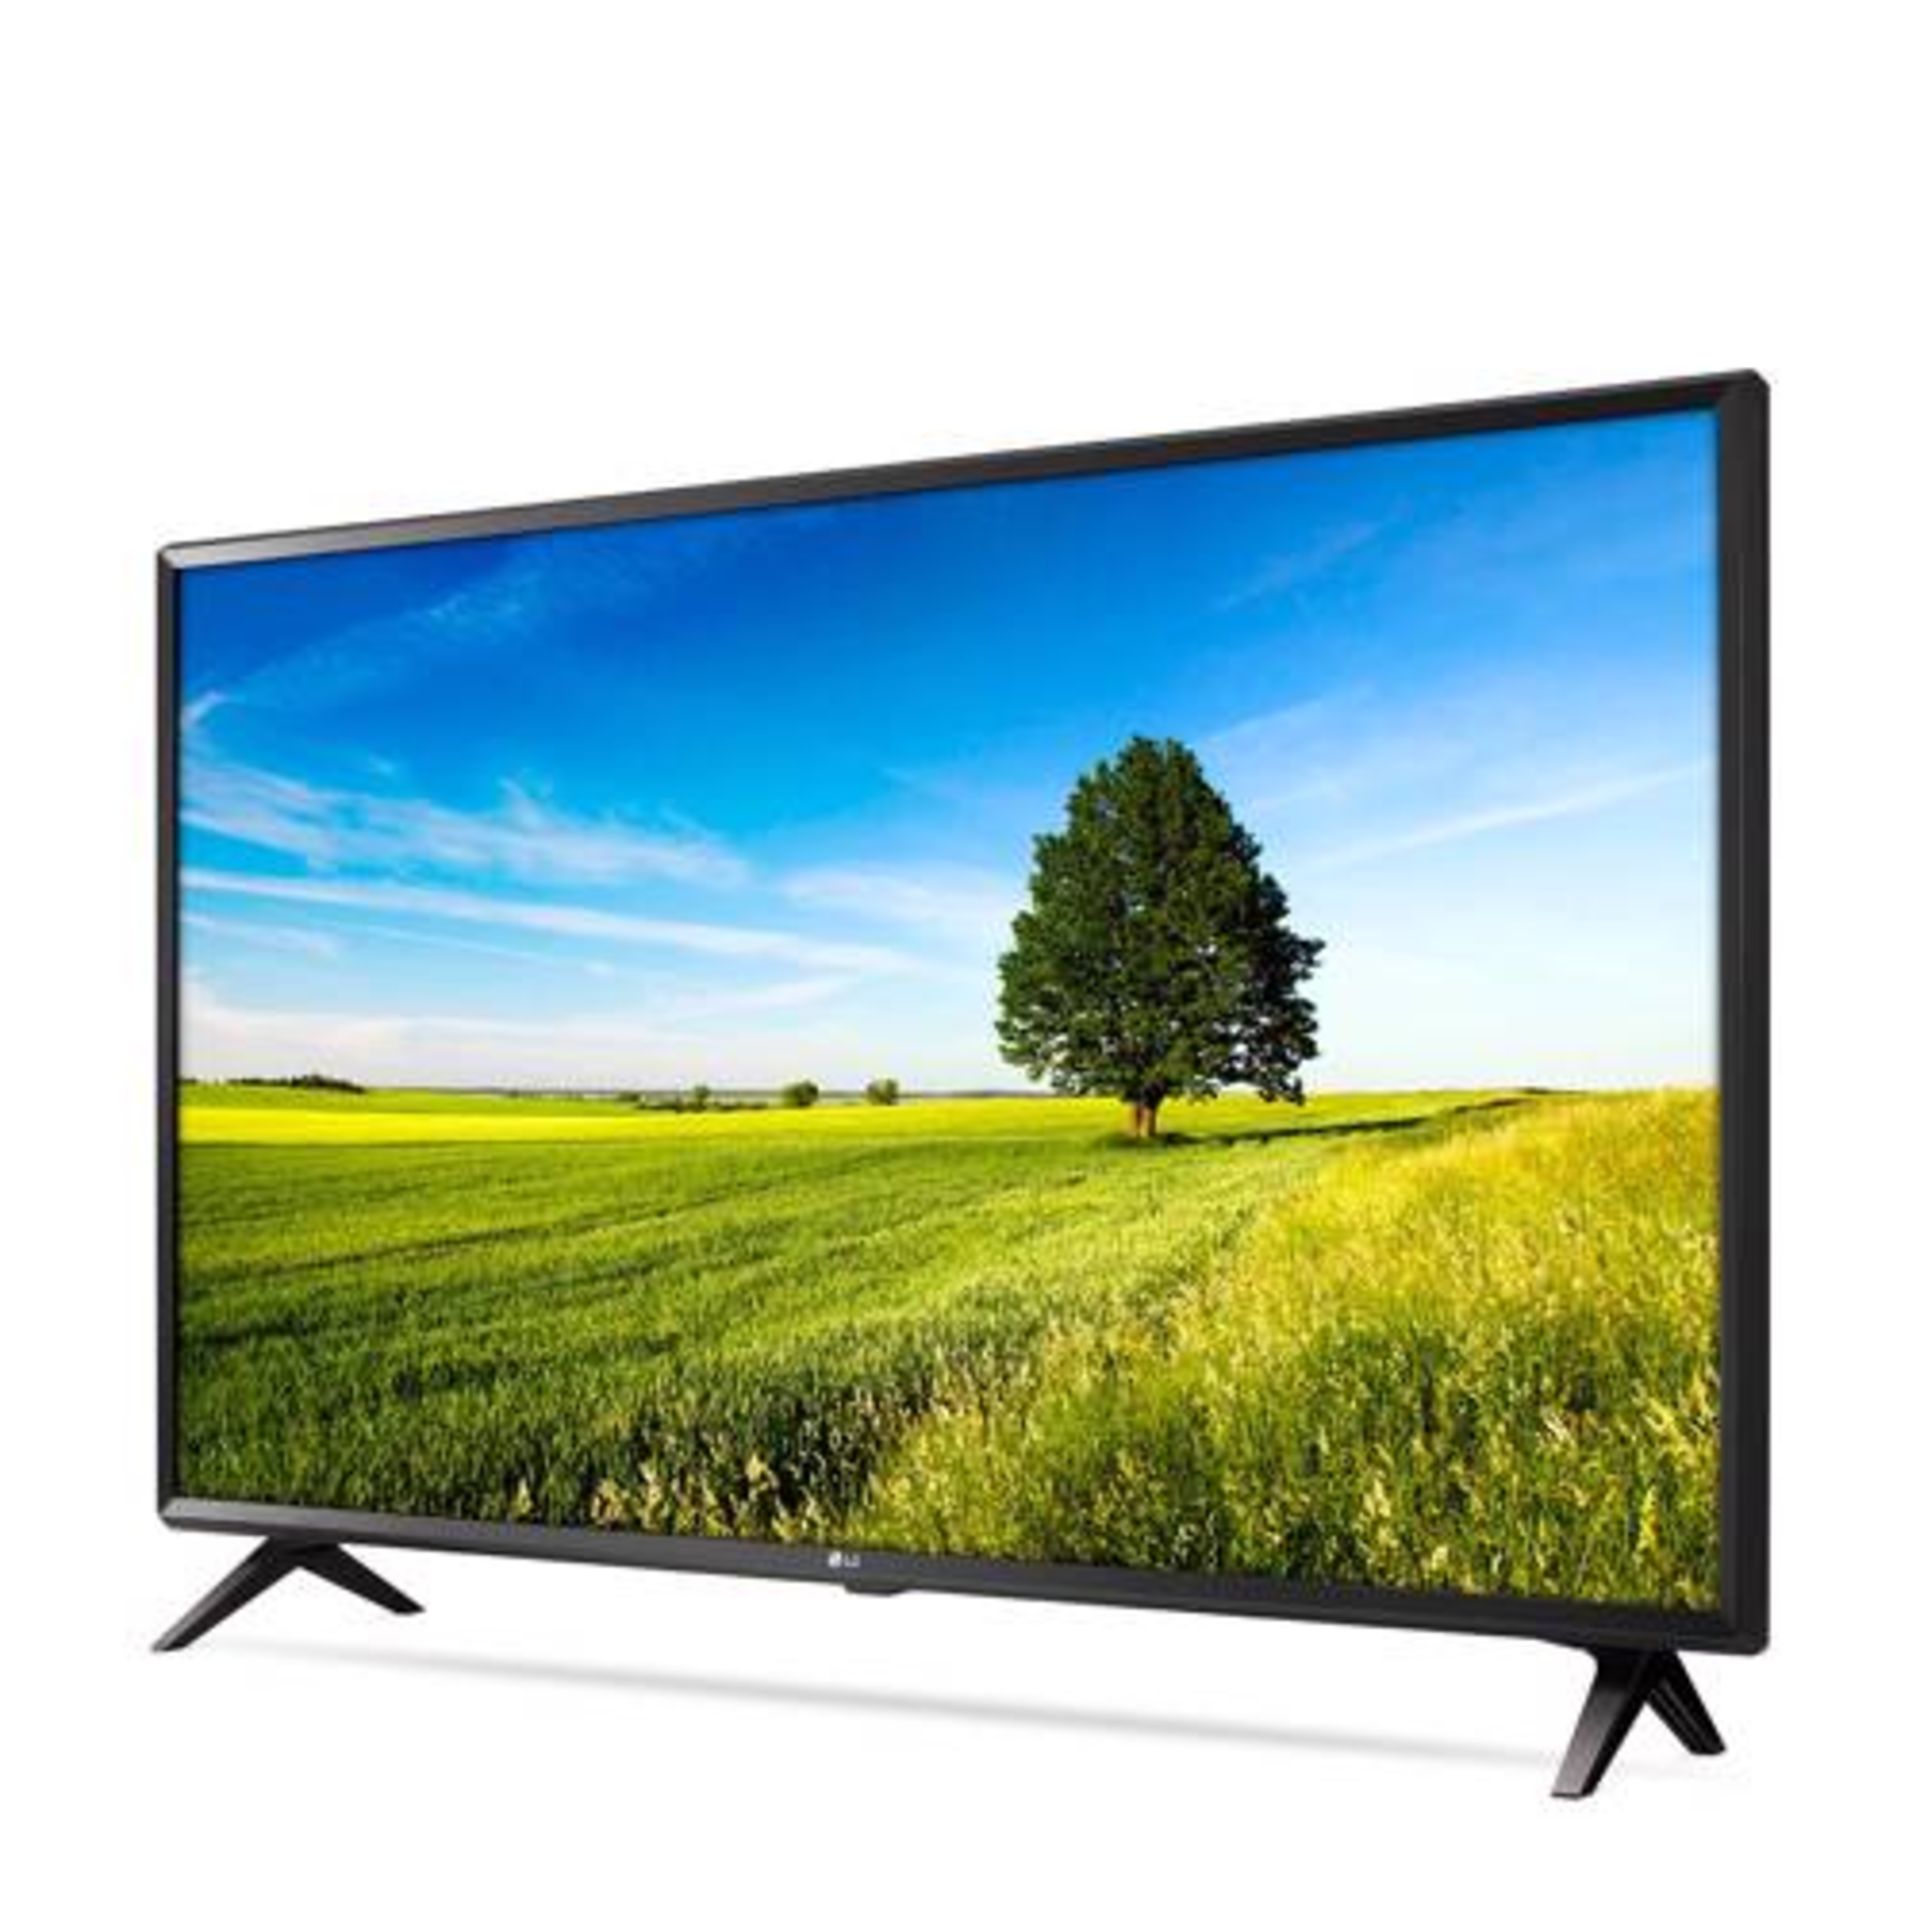 V Grade A LG 50 Inch ACTIVE HDR 4K ULTRA HD LED SMART TV WITH FREEVIEW HD & WEBOS 4.0 & WIFI - AI TV - Image 2 of 2